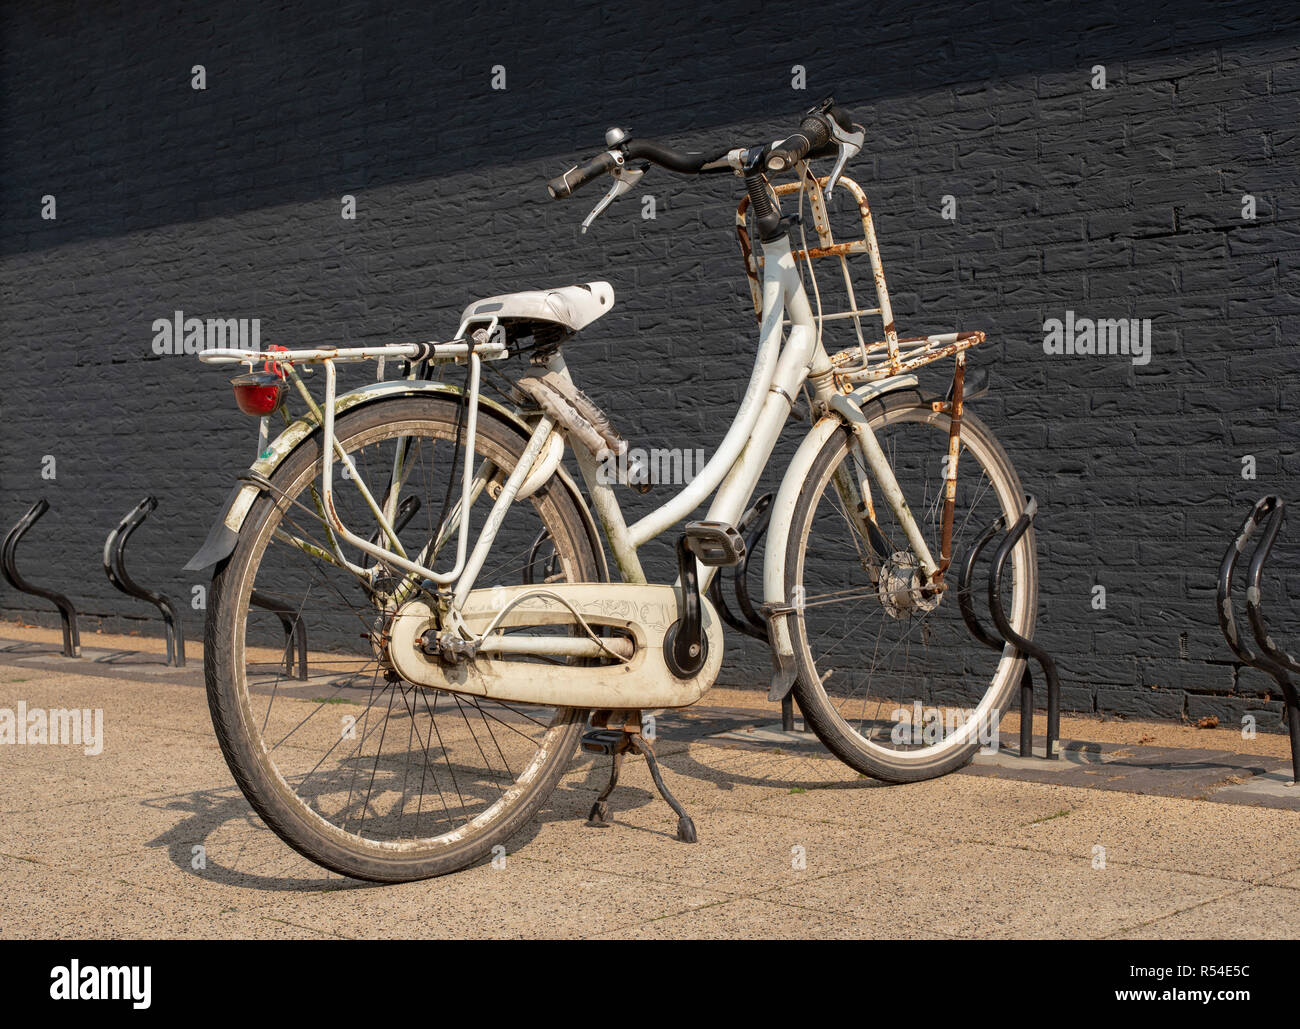 Old rusty grunge vintage white bike in bicycle rack in front of a black painted brick wall. Stock Photo